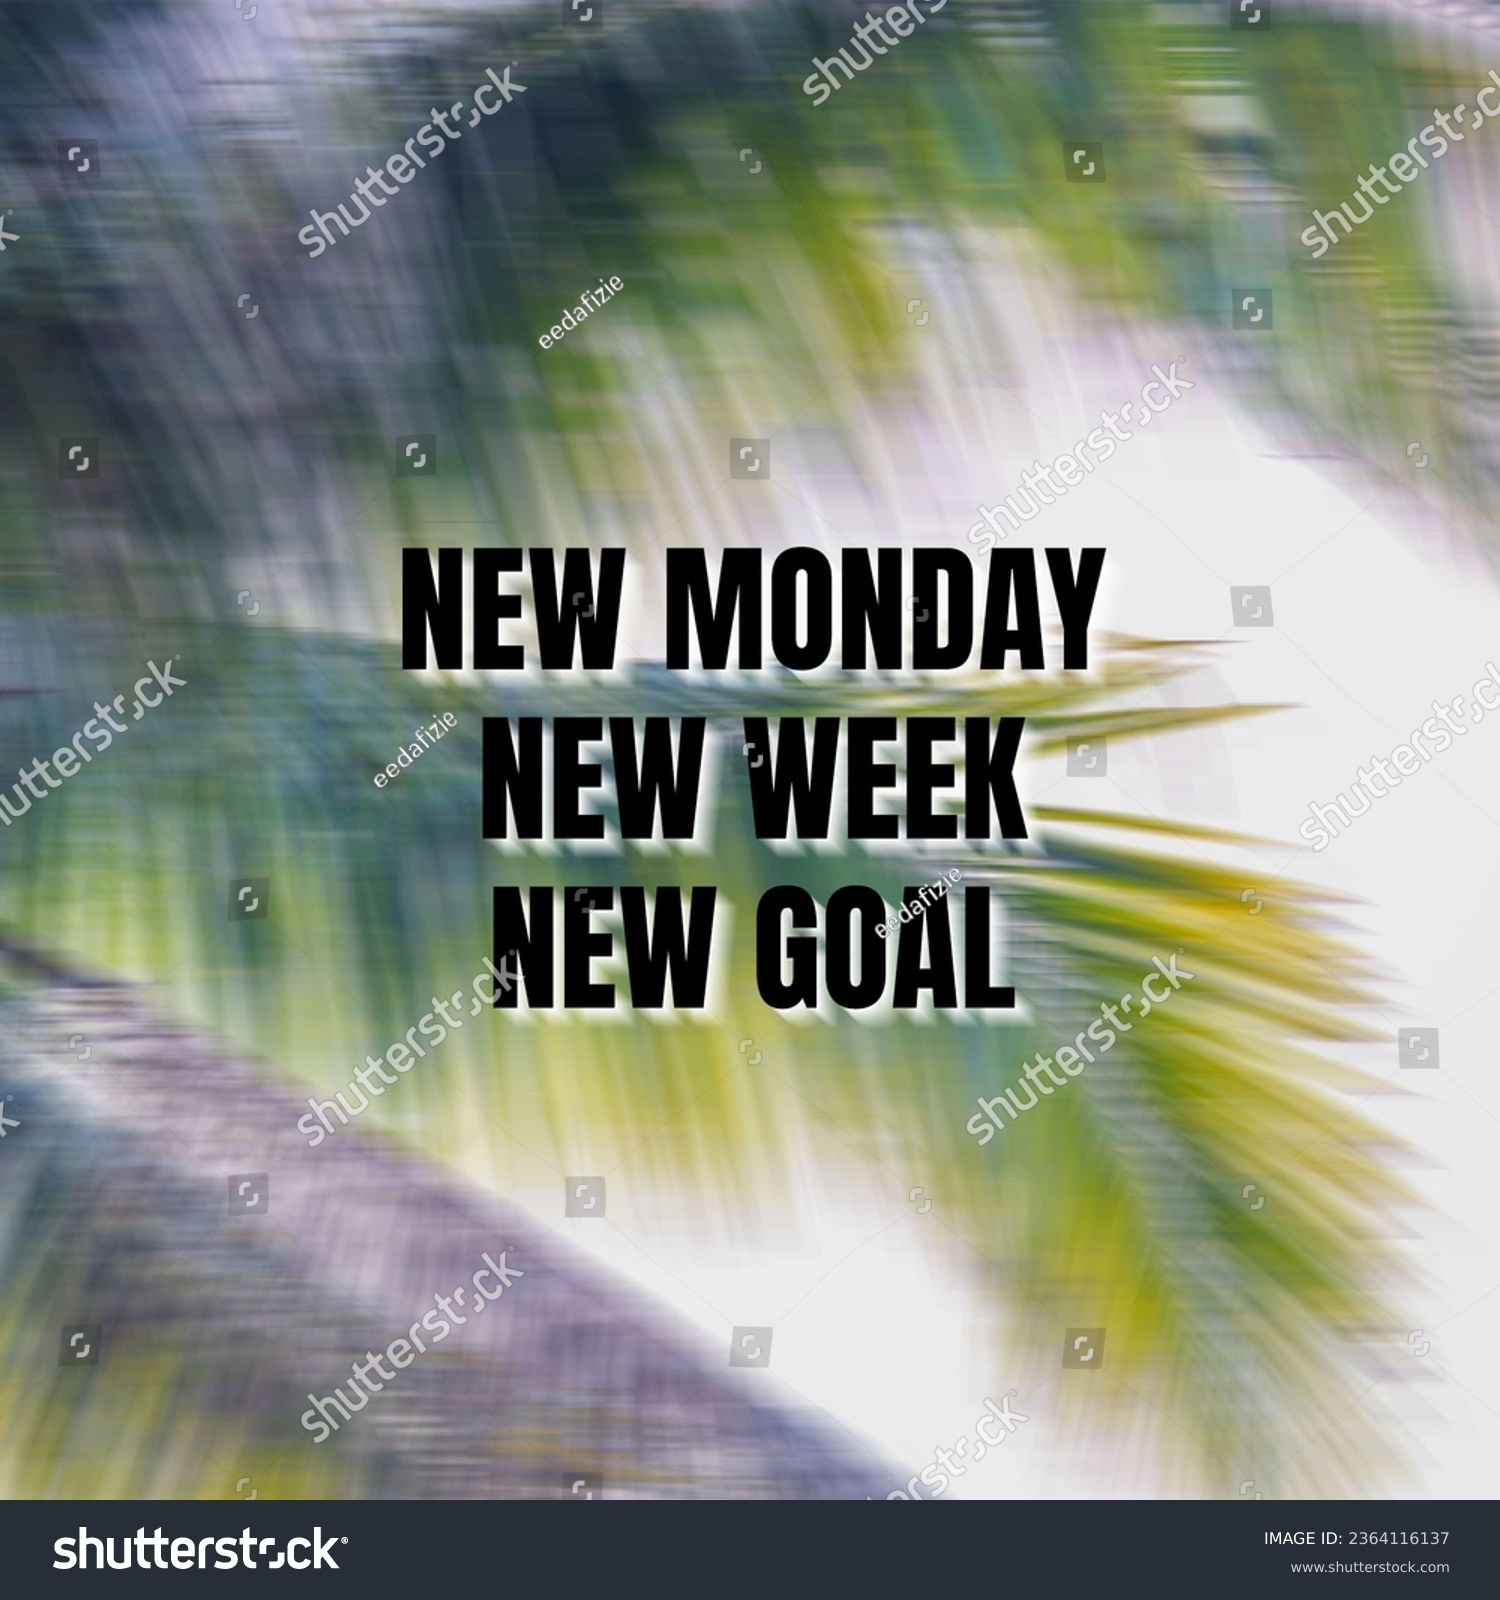 Motivational and inspirational quote - New Monday, new week, new goal. With blurred vintage-styled background. #2364116137